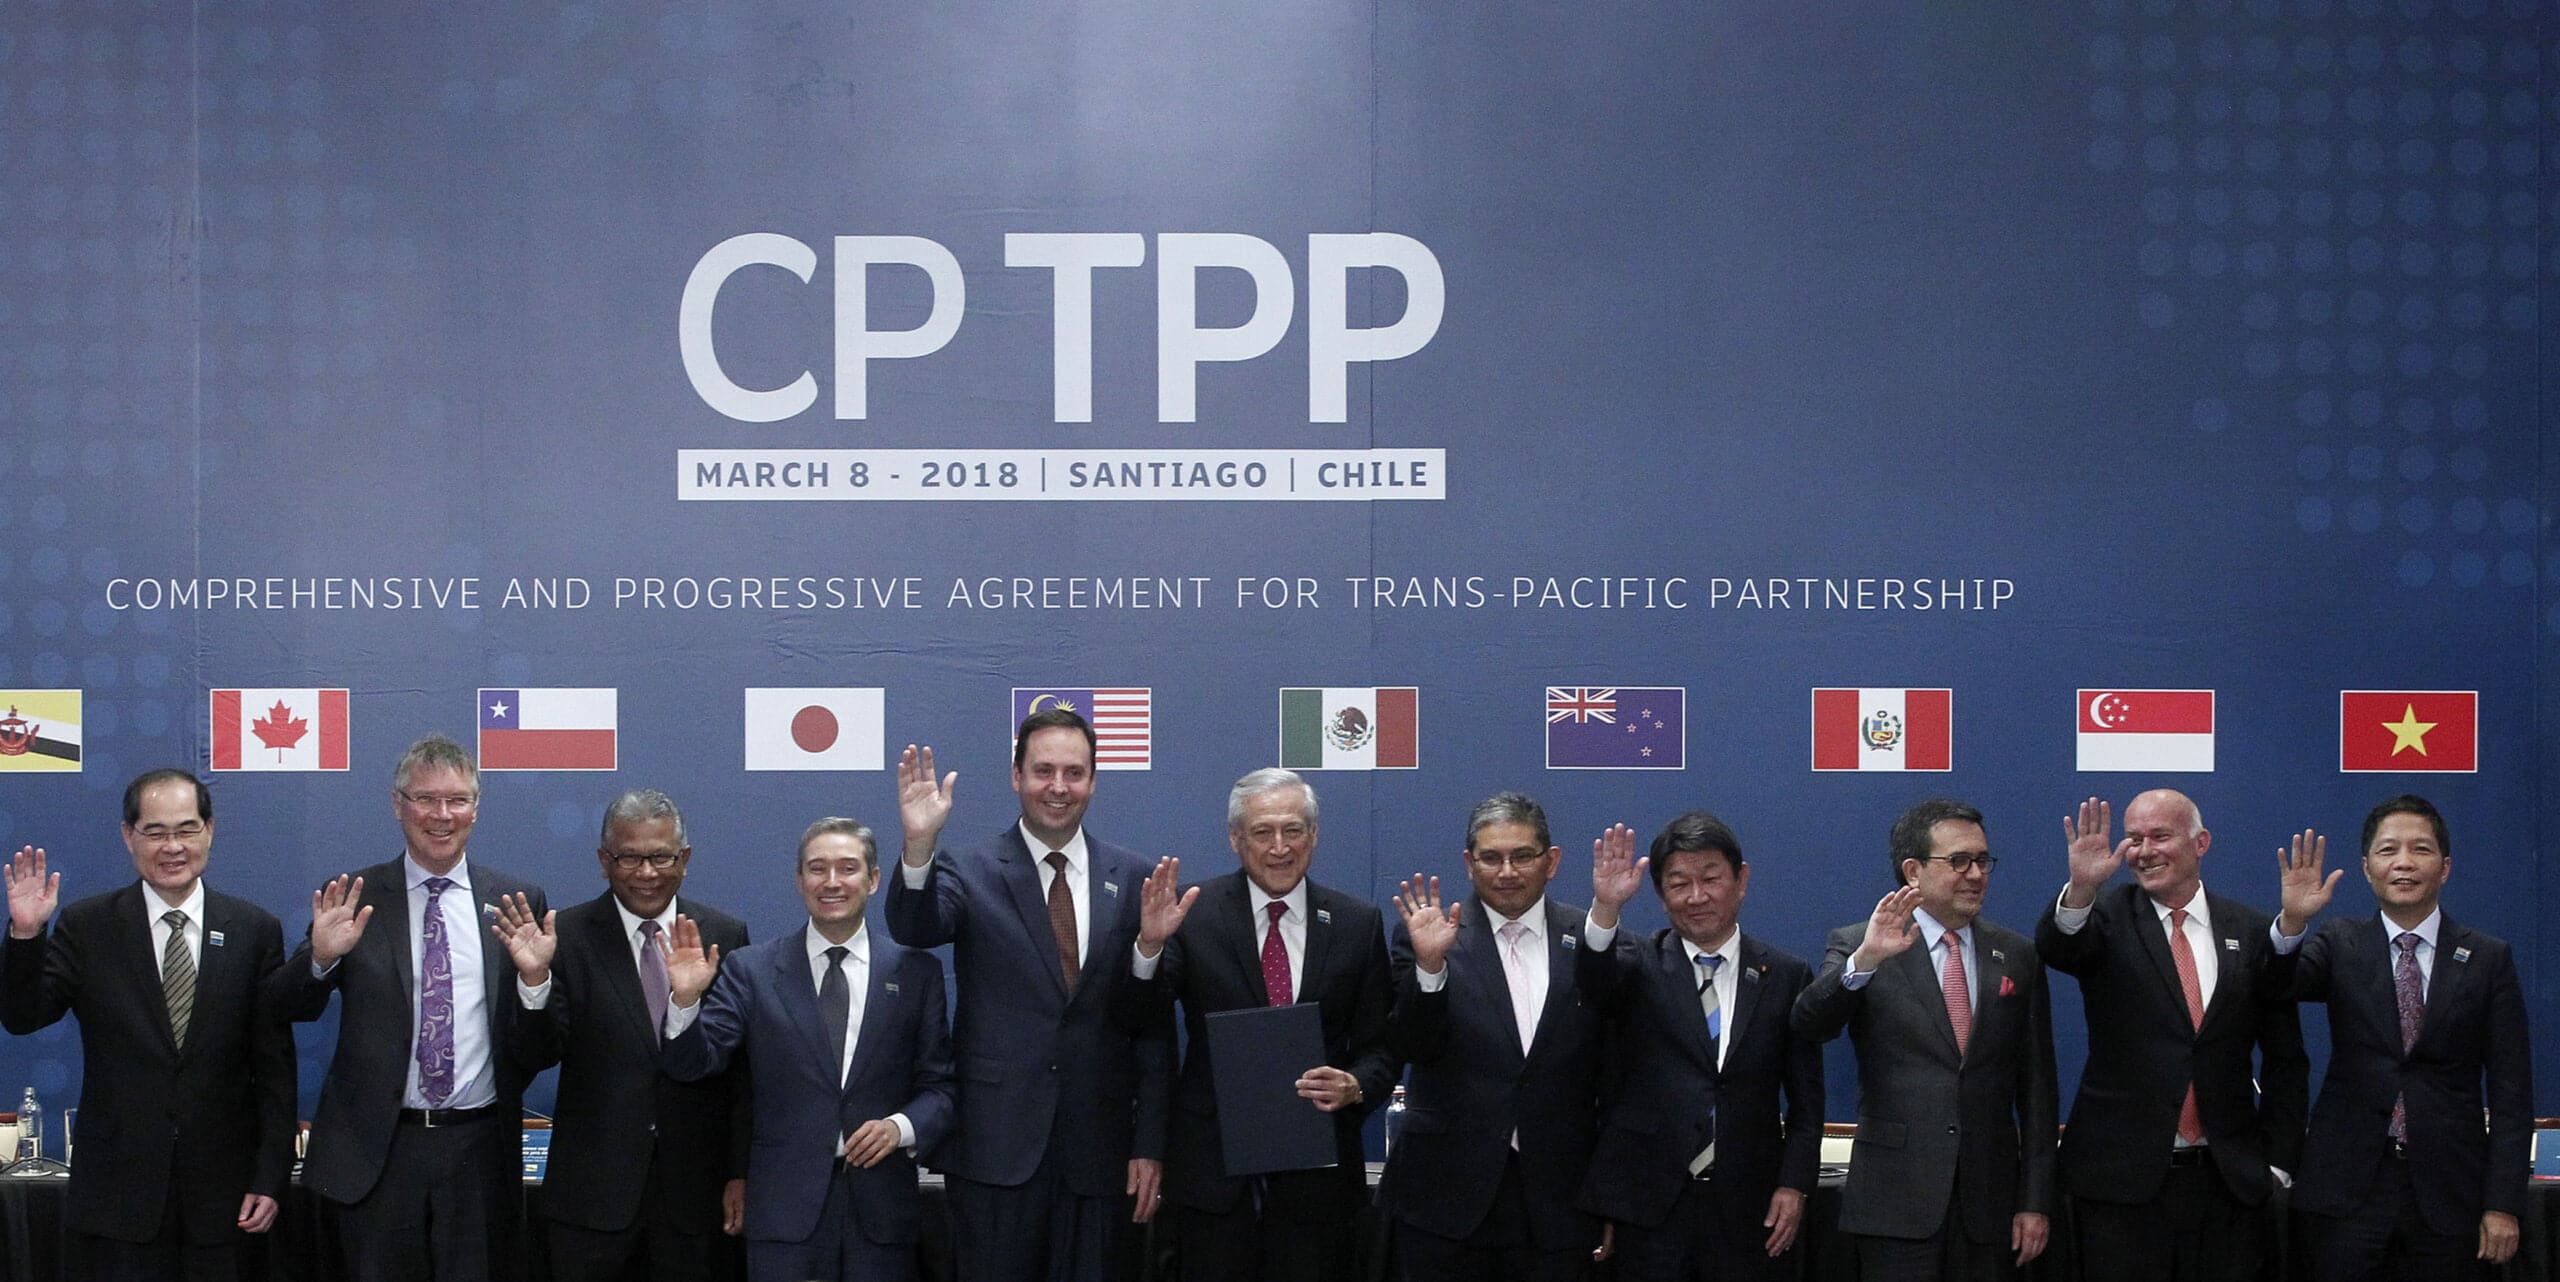 UK joins CPTPP, Trans-Pacific trade bloc